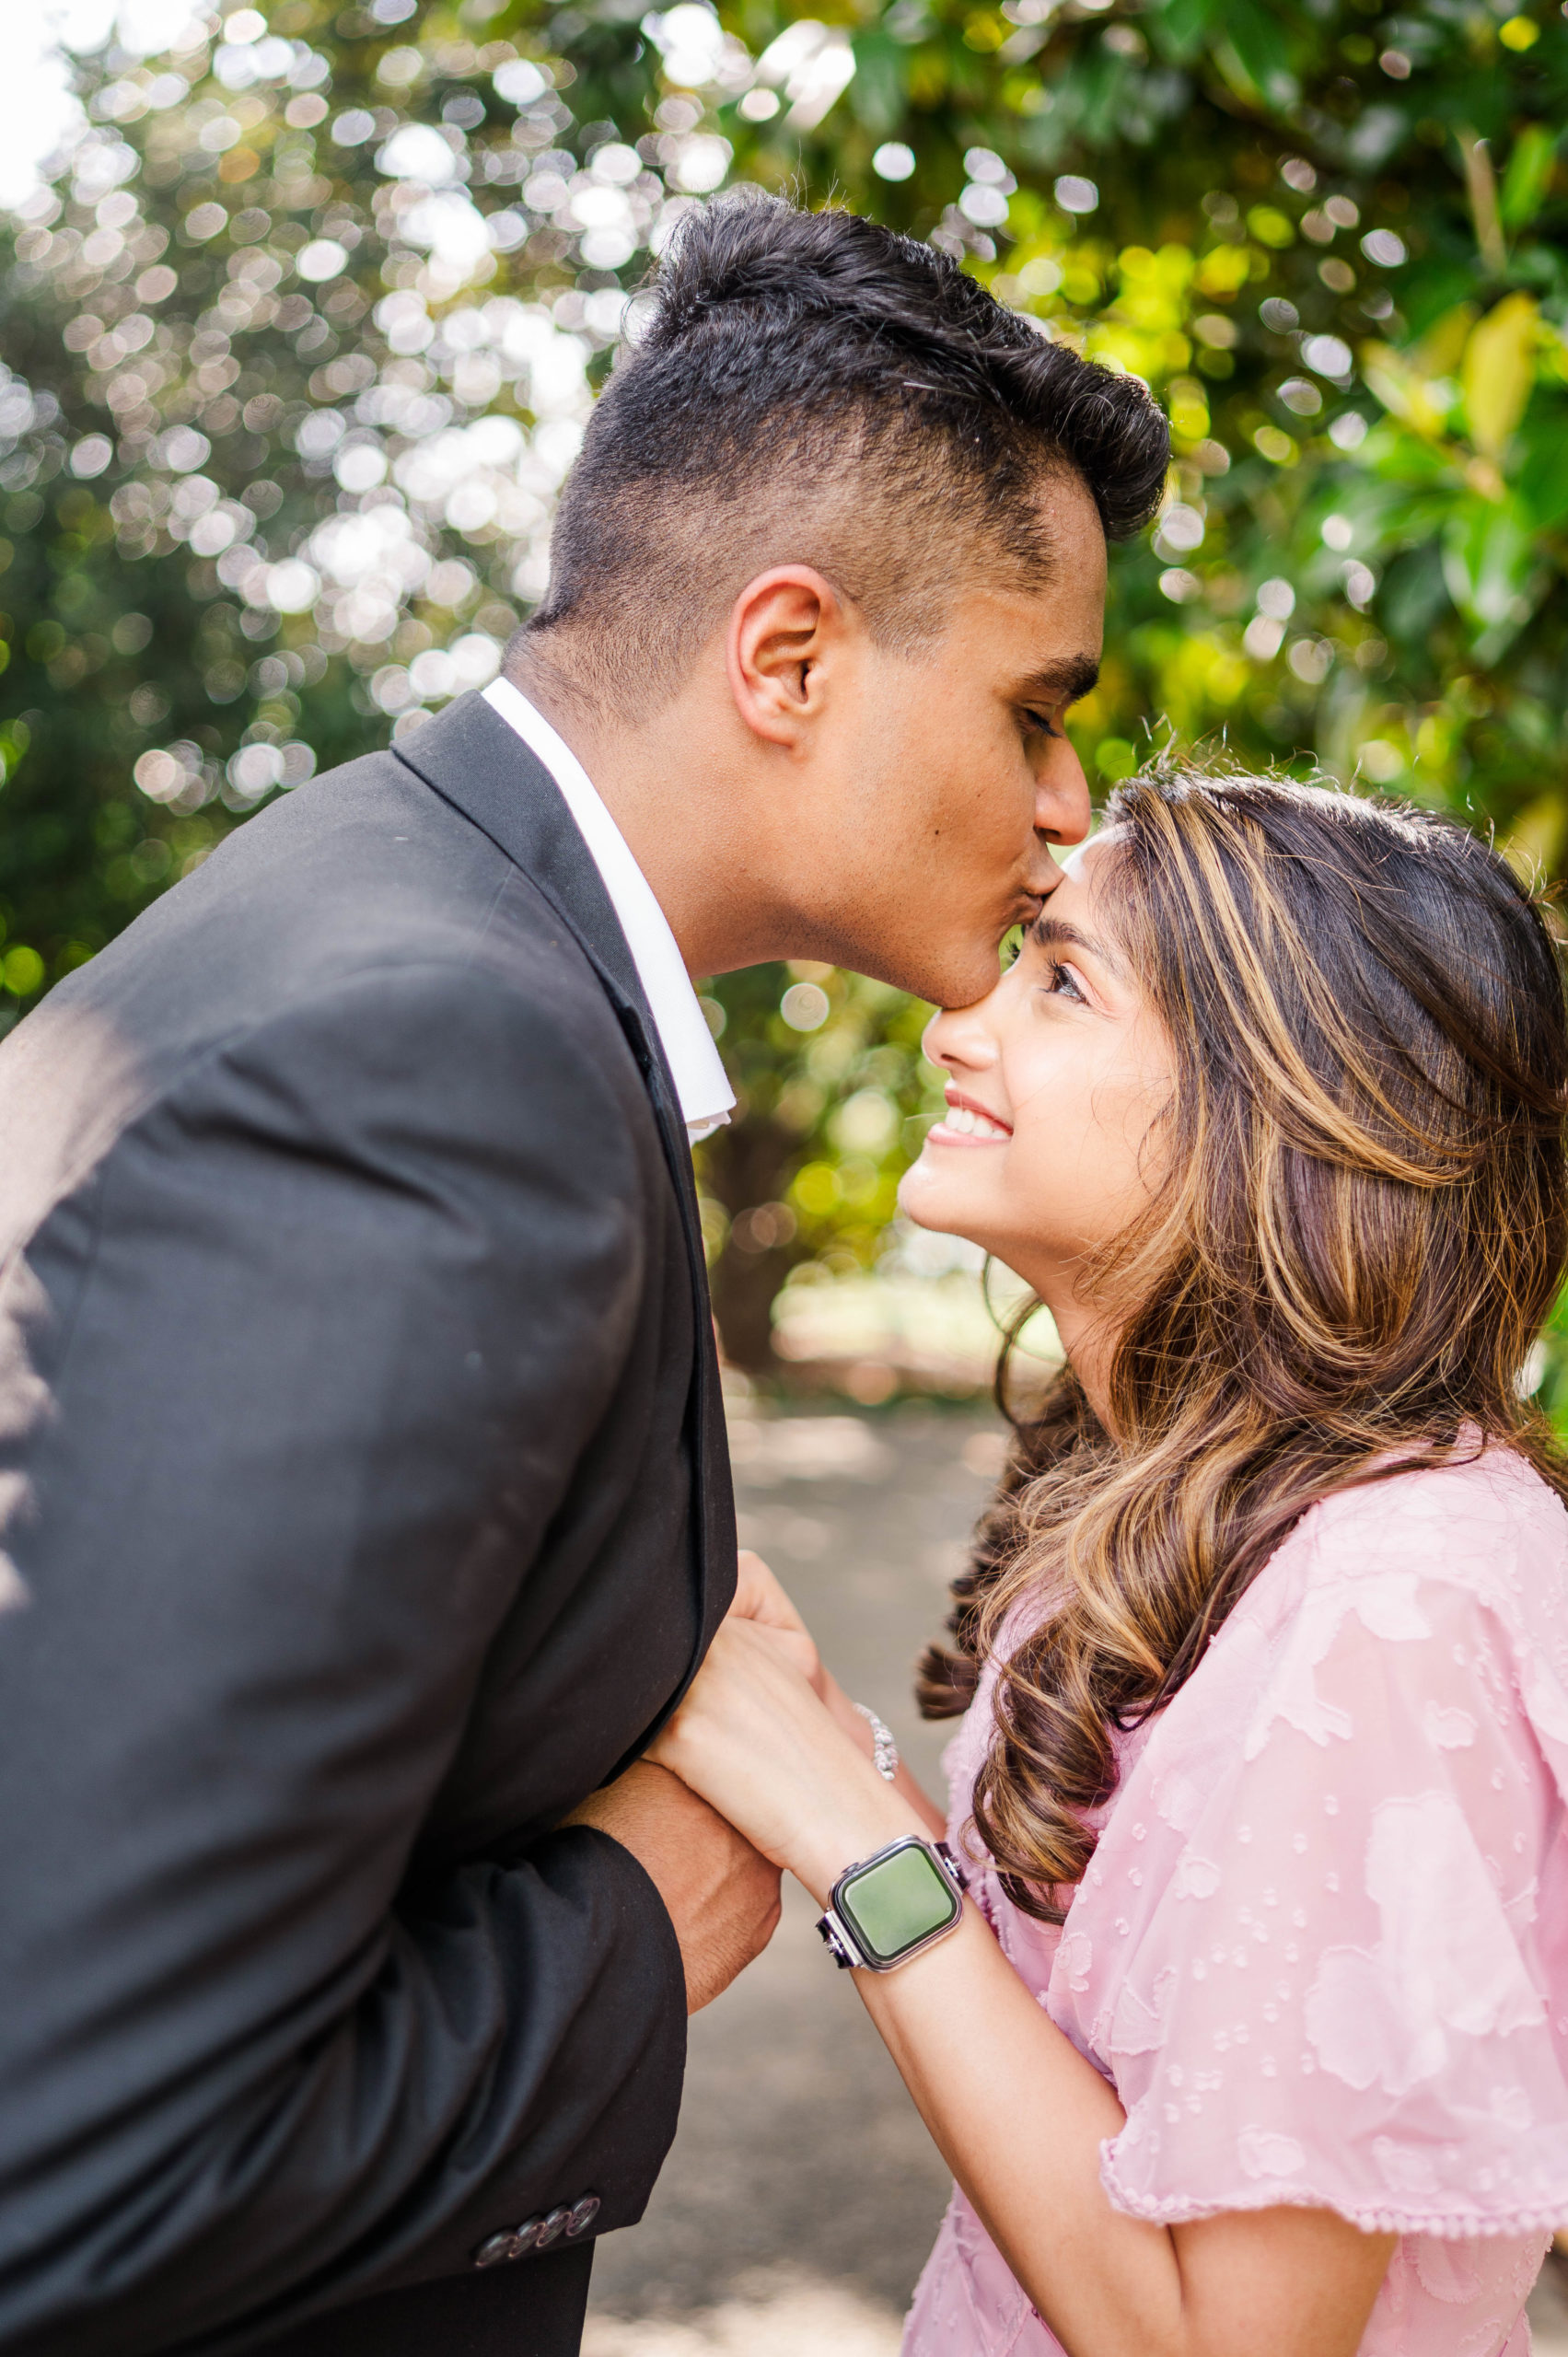 Groom kisses bride on forehead after proposing at the Dallas Arboretum & Botanical Gardens